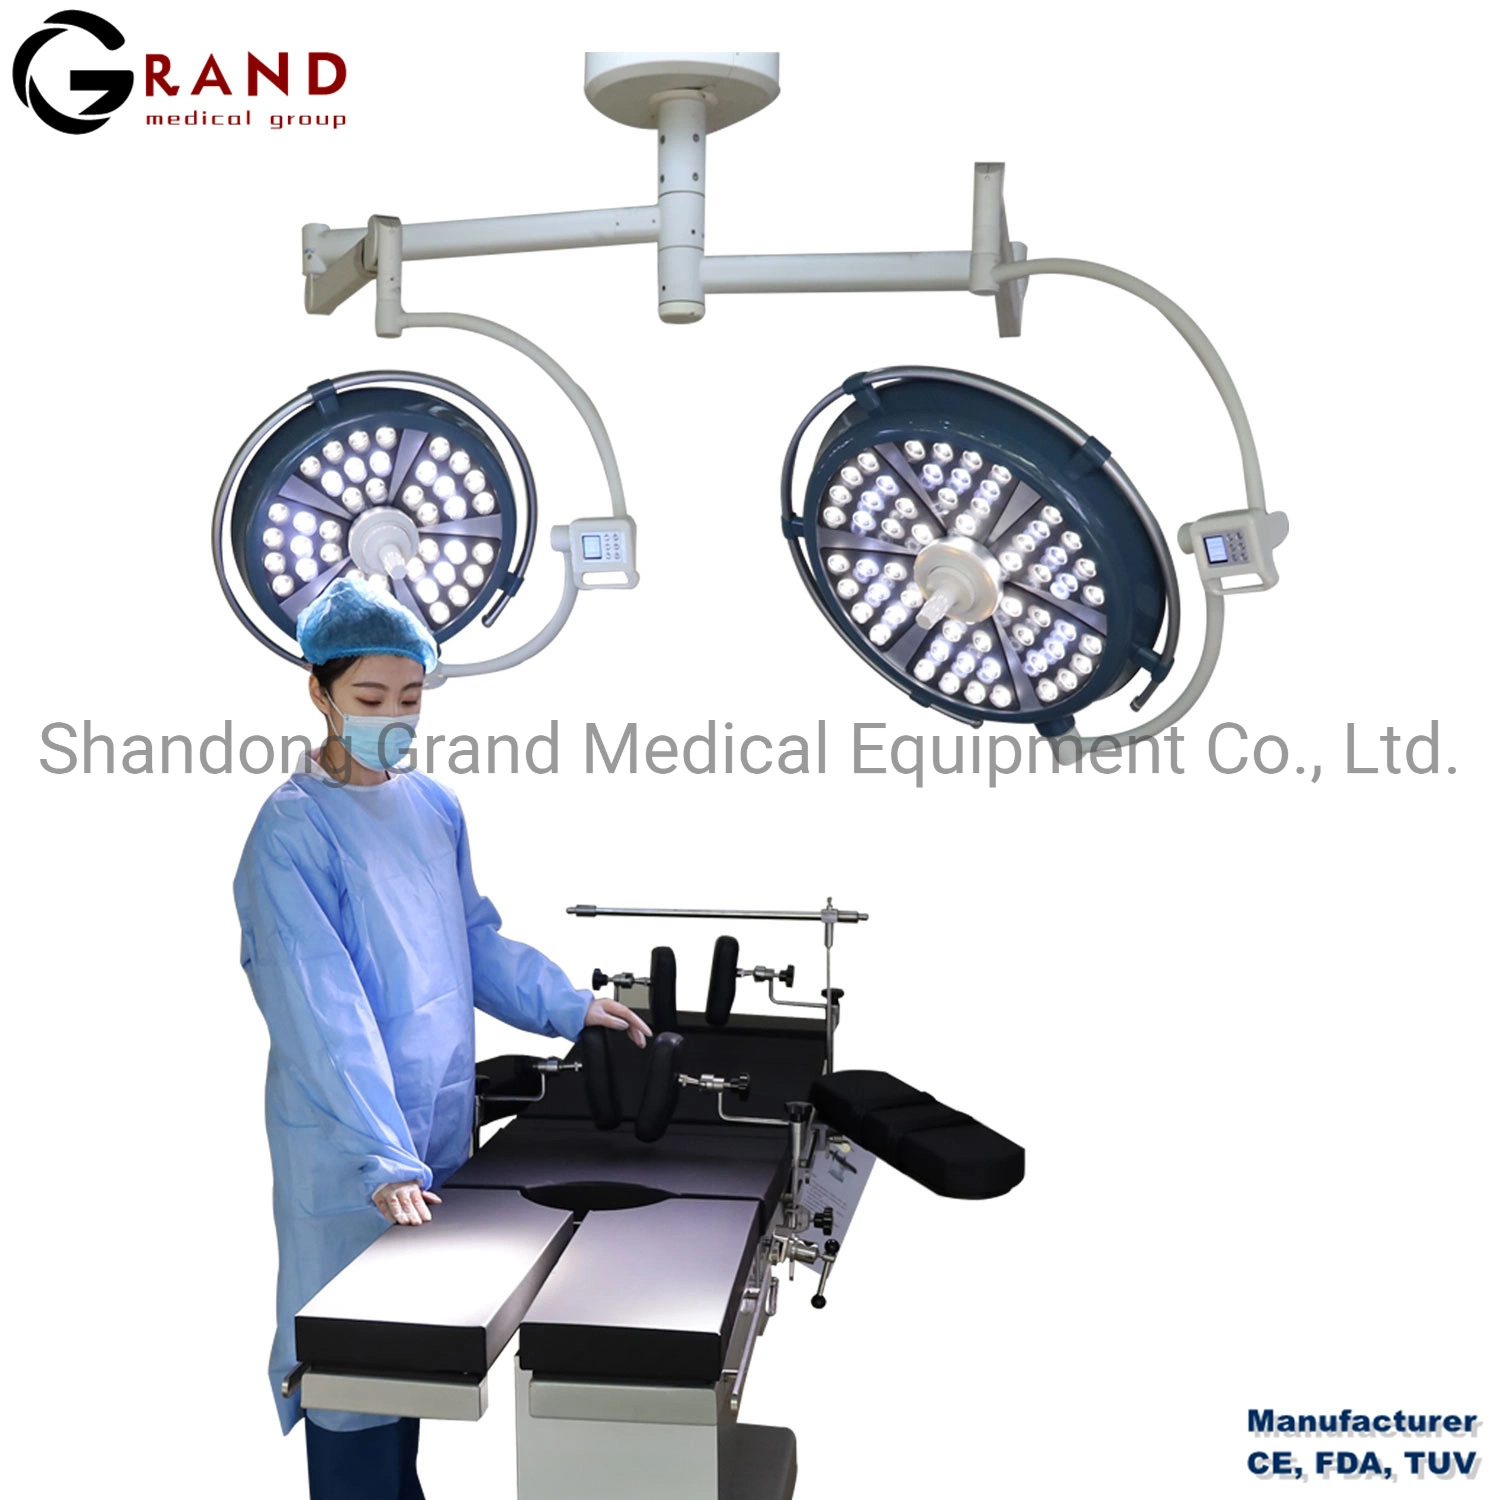 Hospital Equipment Medical Device LED Shadowless Light Medical LED Surgical Lights Operating Room Examination Ot Lamp Ceiling Operating Table Light